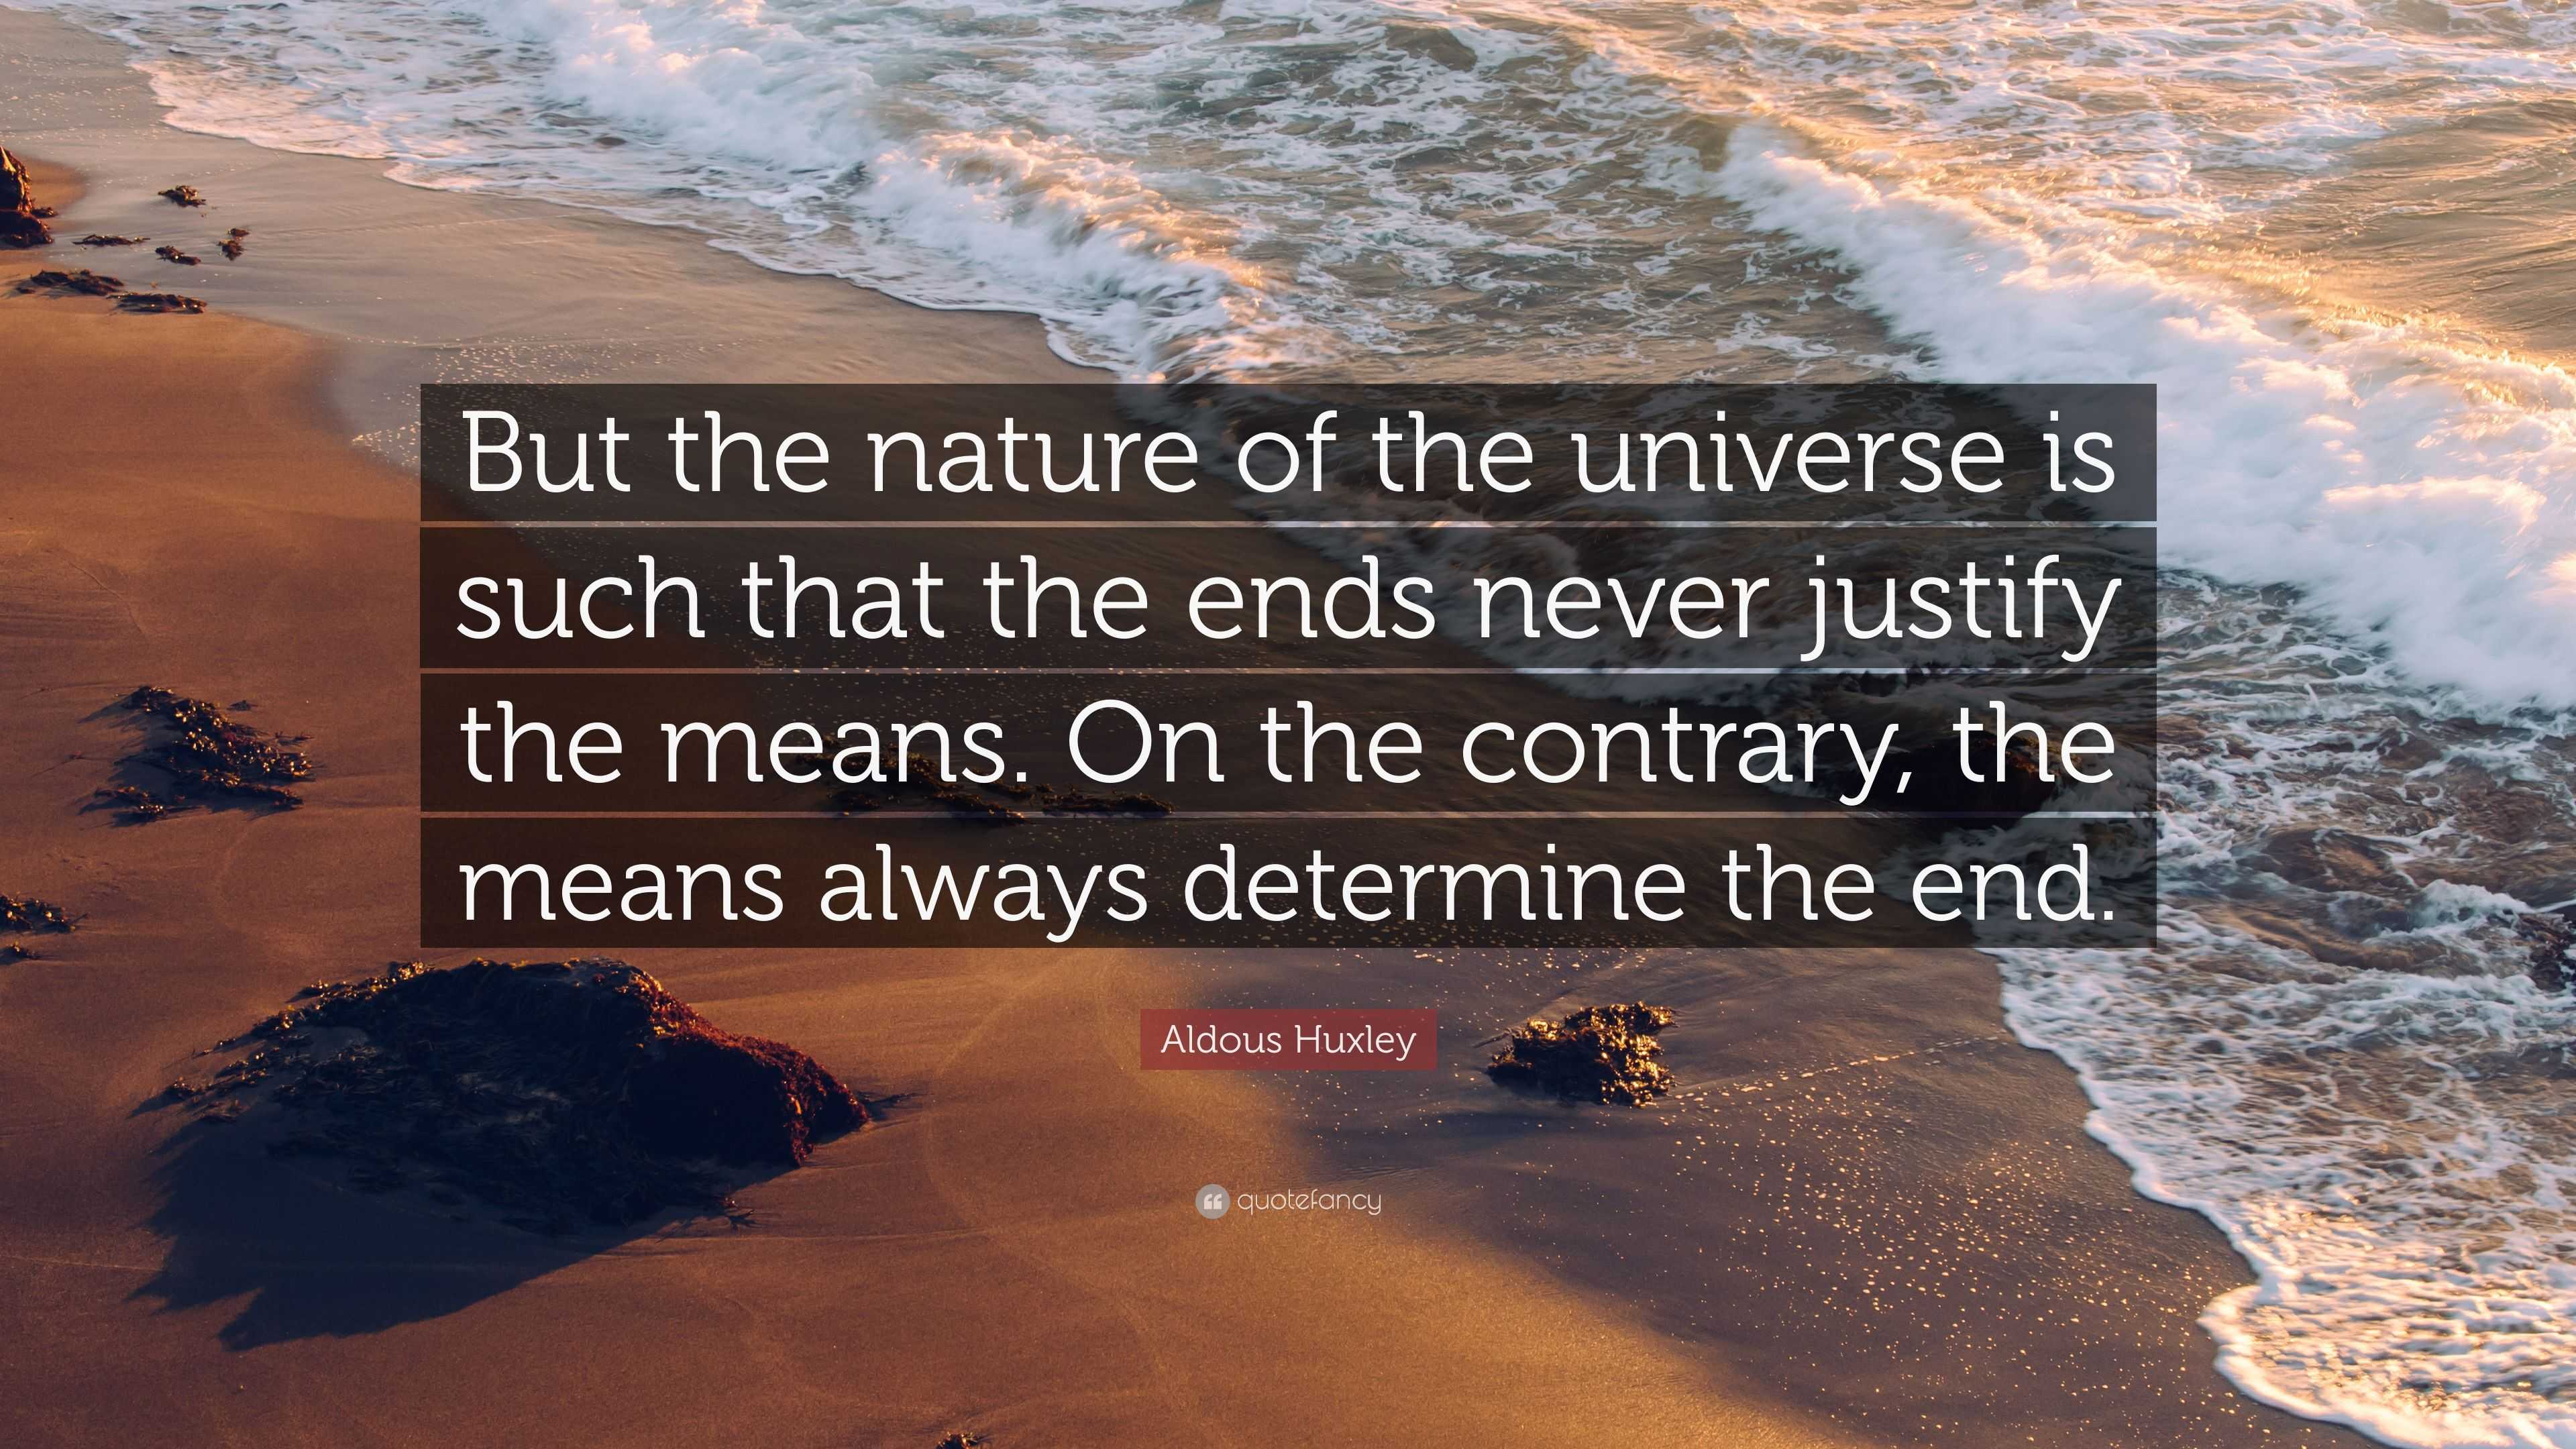 Aldous Huxley Quote: “But the nature of the universe is such that the ...